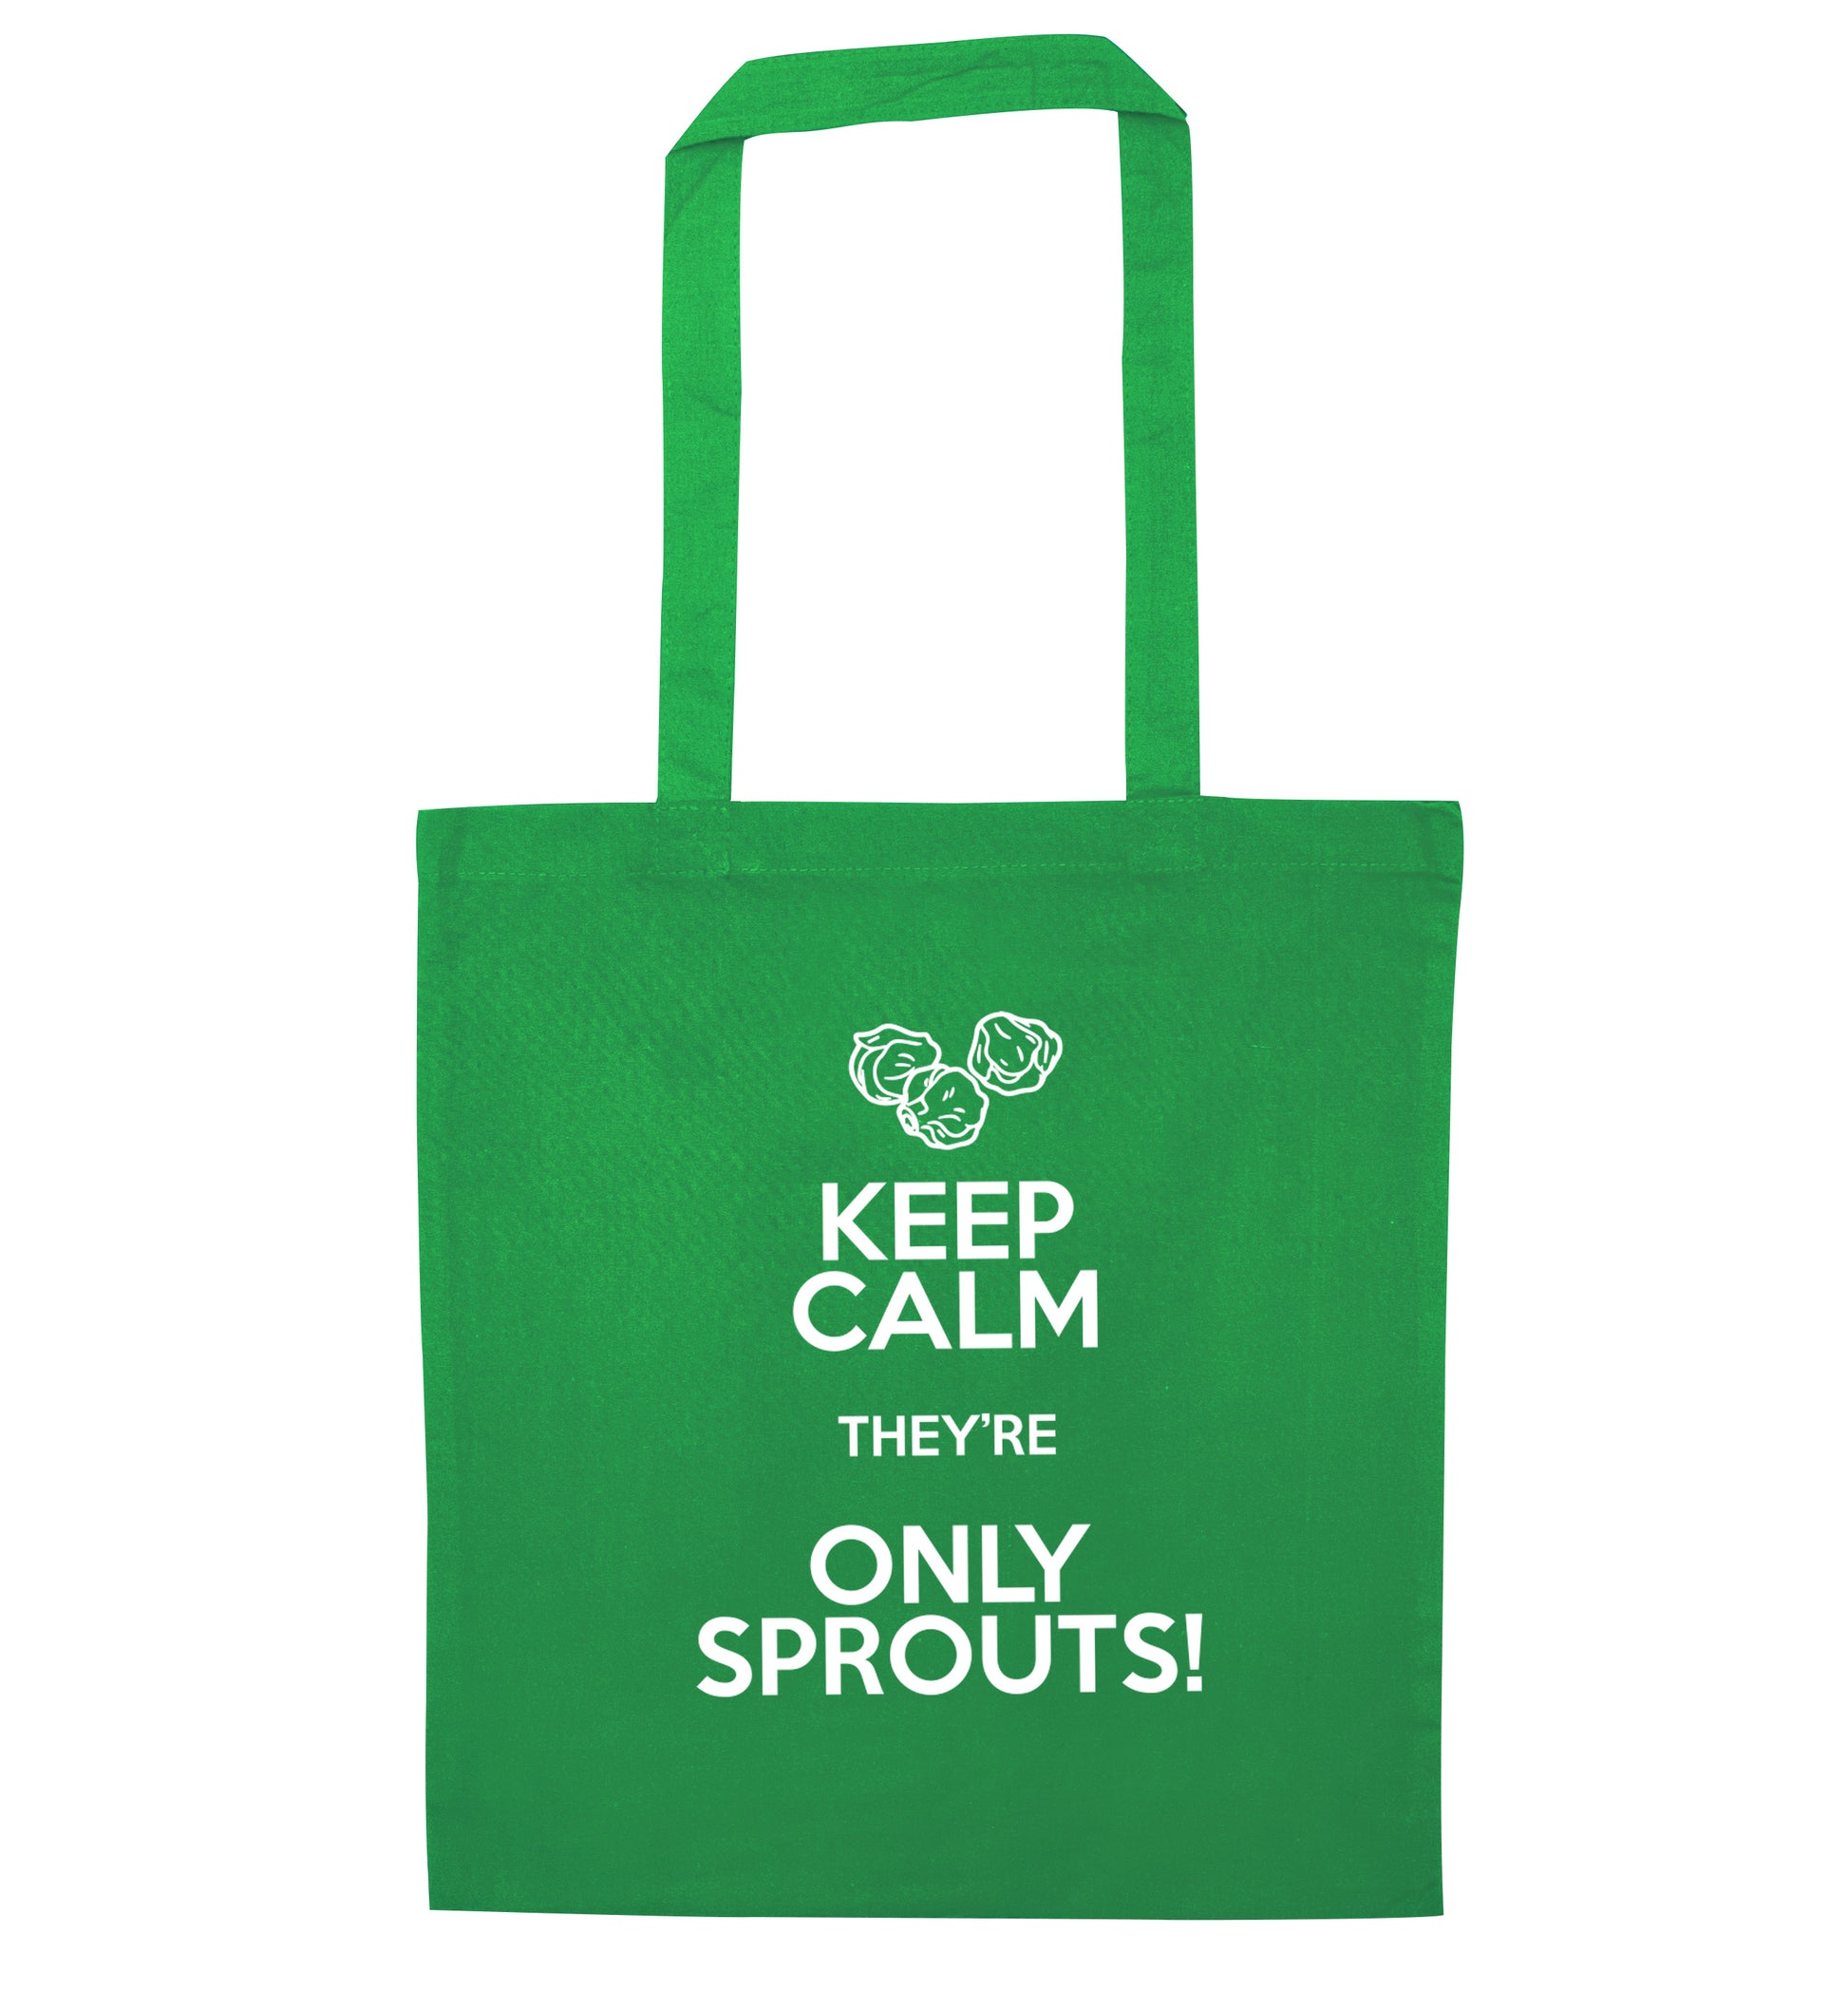 Keep calm they're only sprouts green tote bag